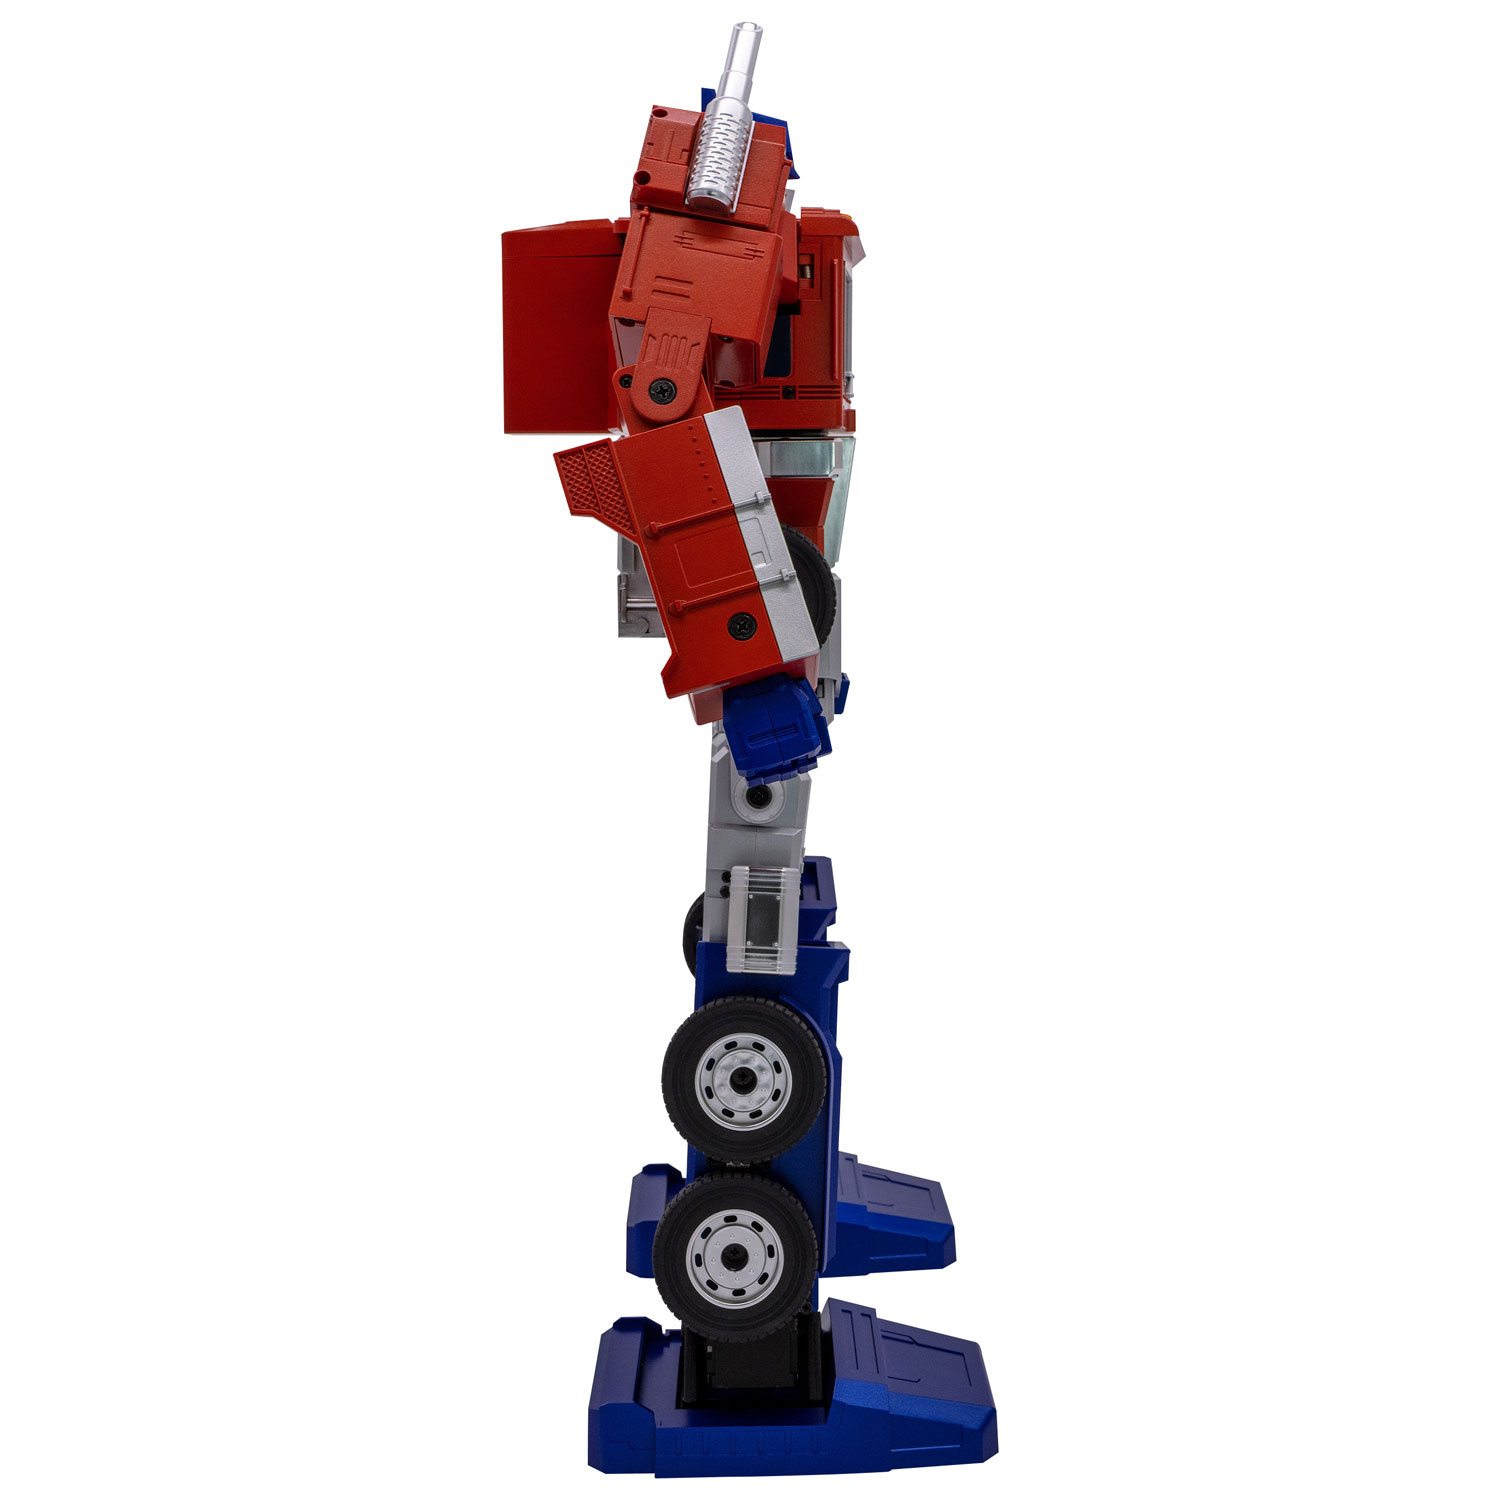 Elite Optimus Prime Offers Self-Transforming Fun For Less Of Your